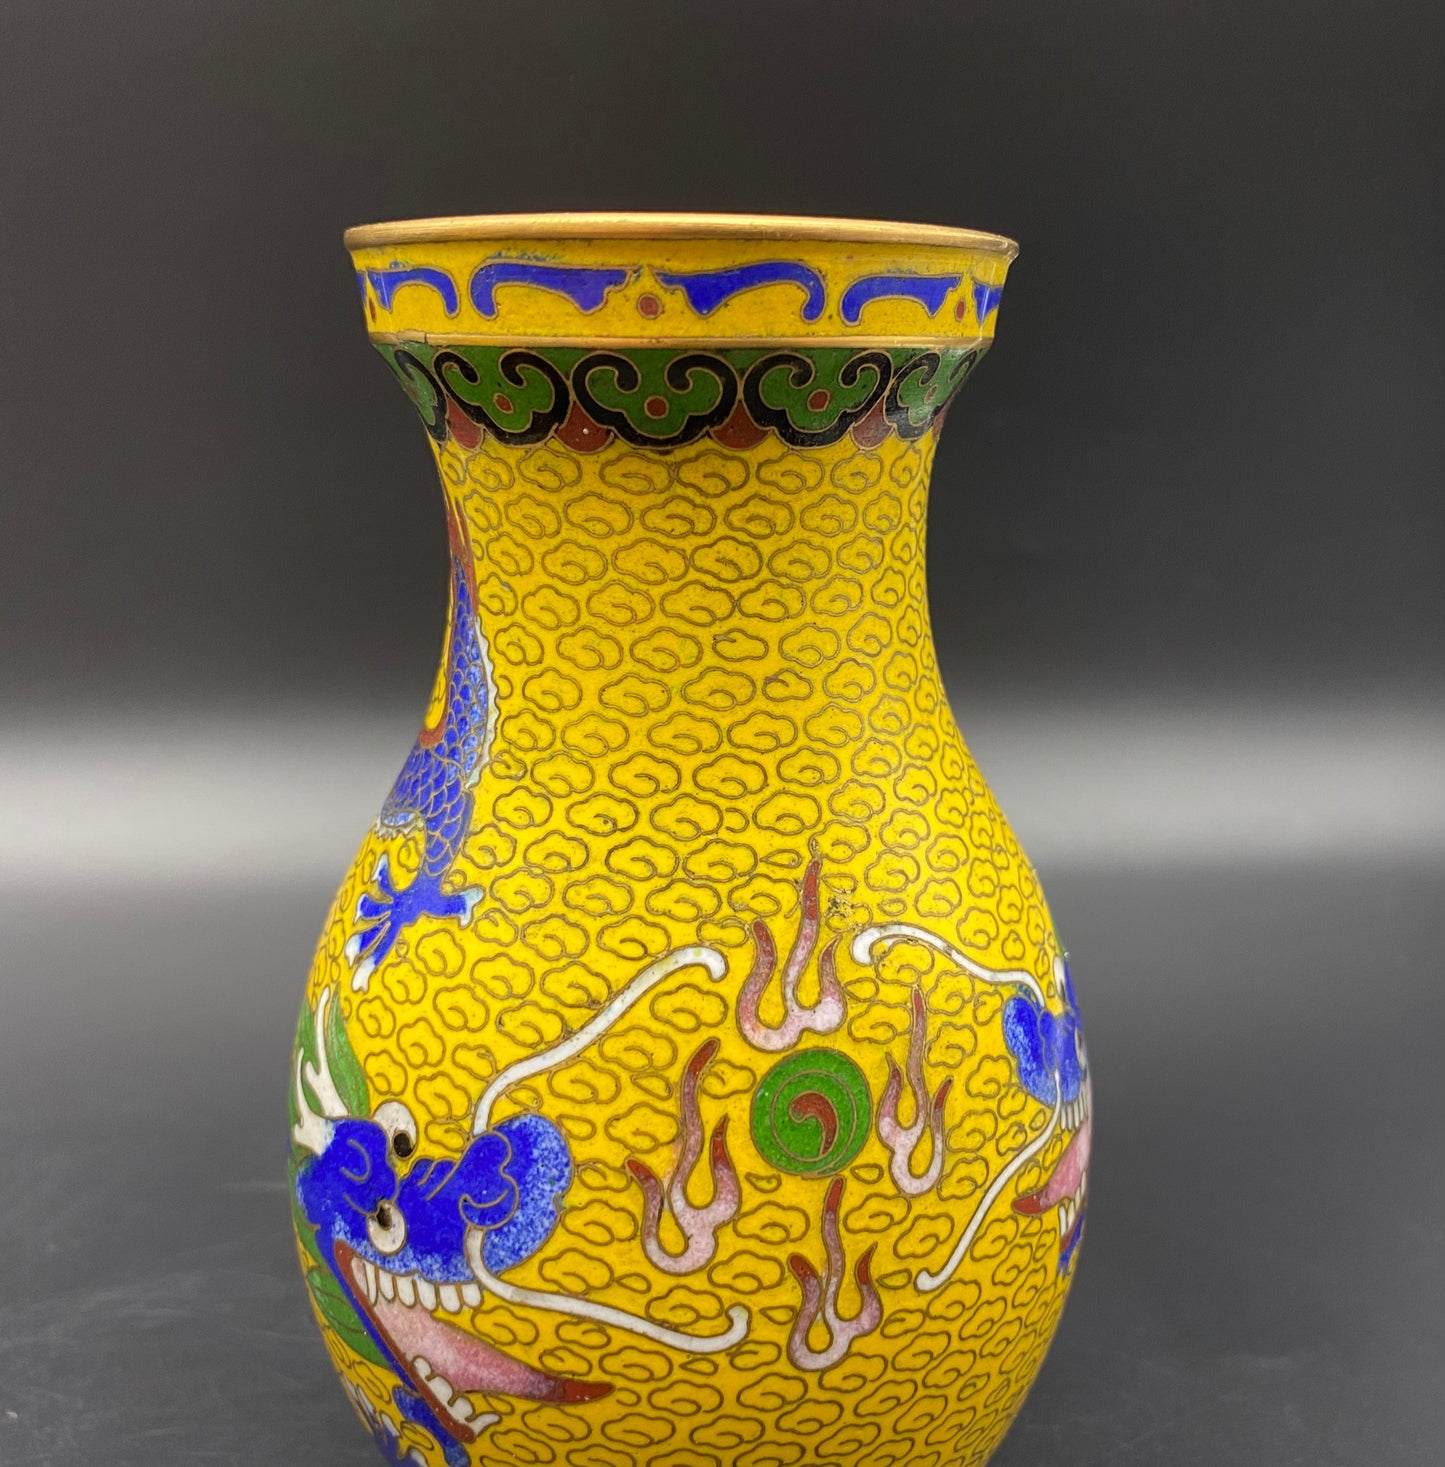 The inside and underside of the vase is finished in a rich turquoise enamel. The vase comes on an intricately carved wooden lacquered stand, and measures 19cm tall - 24cm on its stand and is 14cm wide.